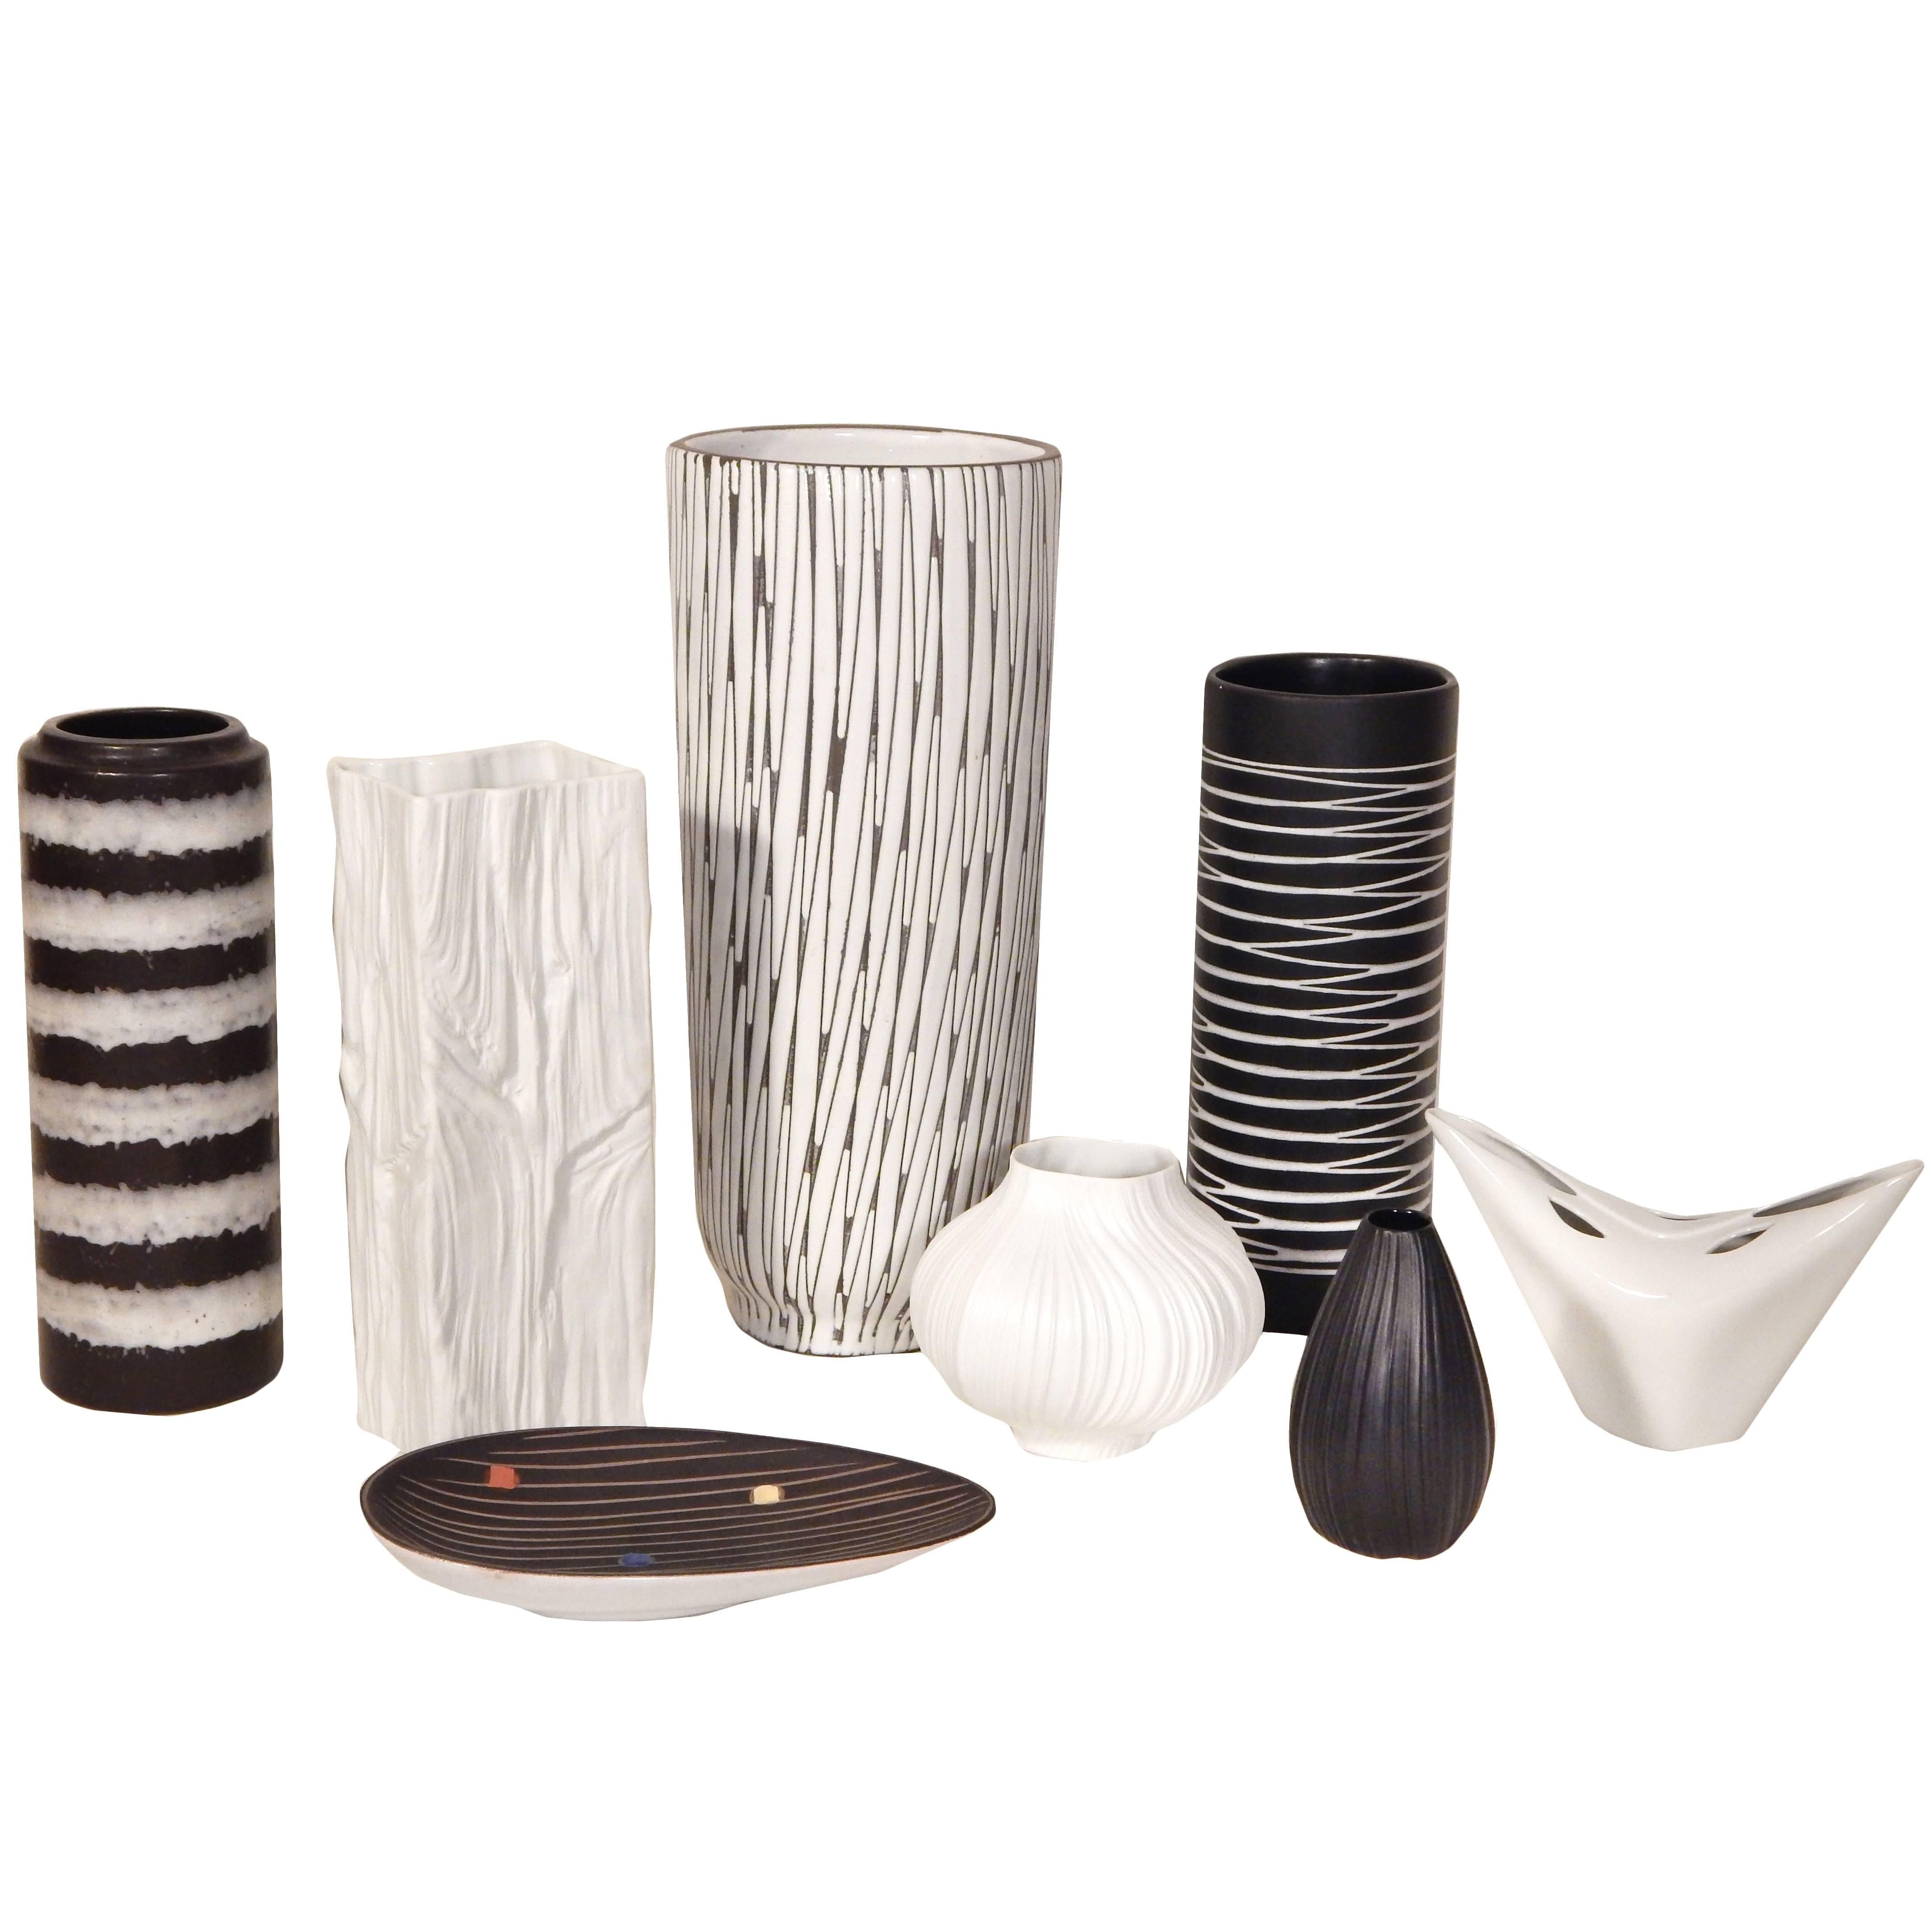 Collection of Black and White Pottery